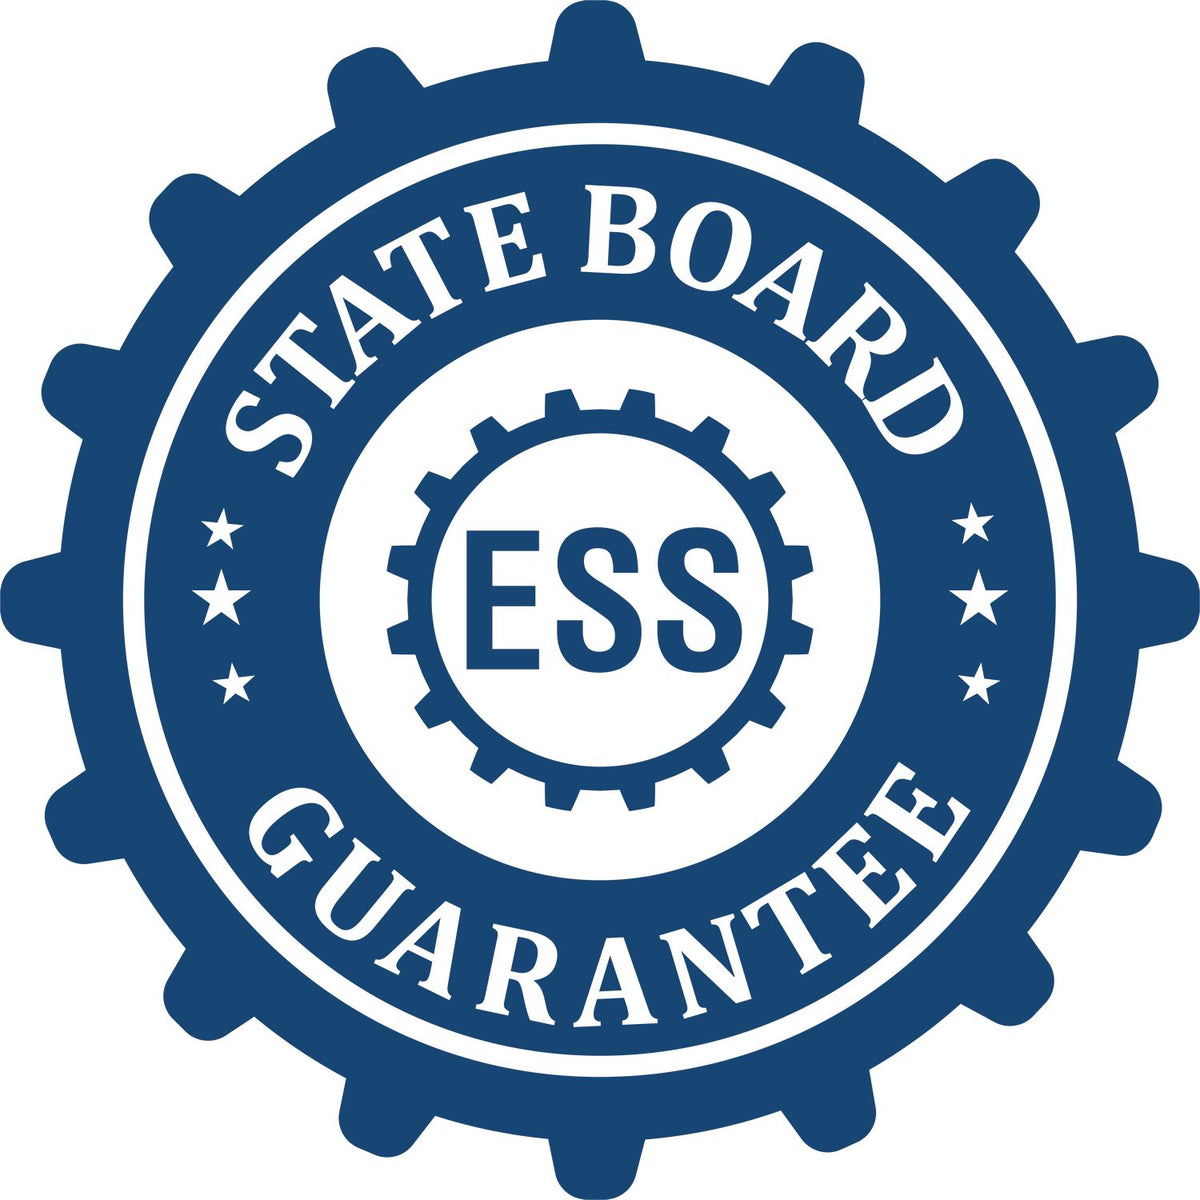 An emblem in a gear shape illustrating a state board guarantee for the Kansas Desk Architect Embossing Seal product.